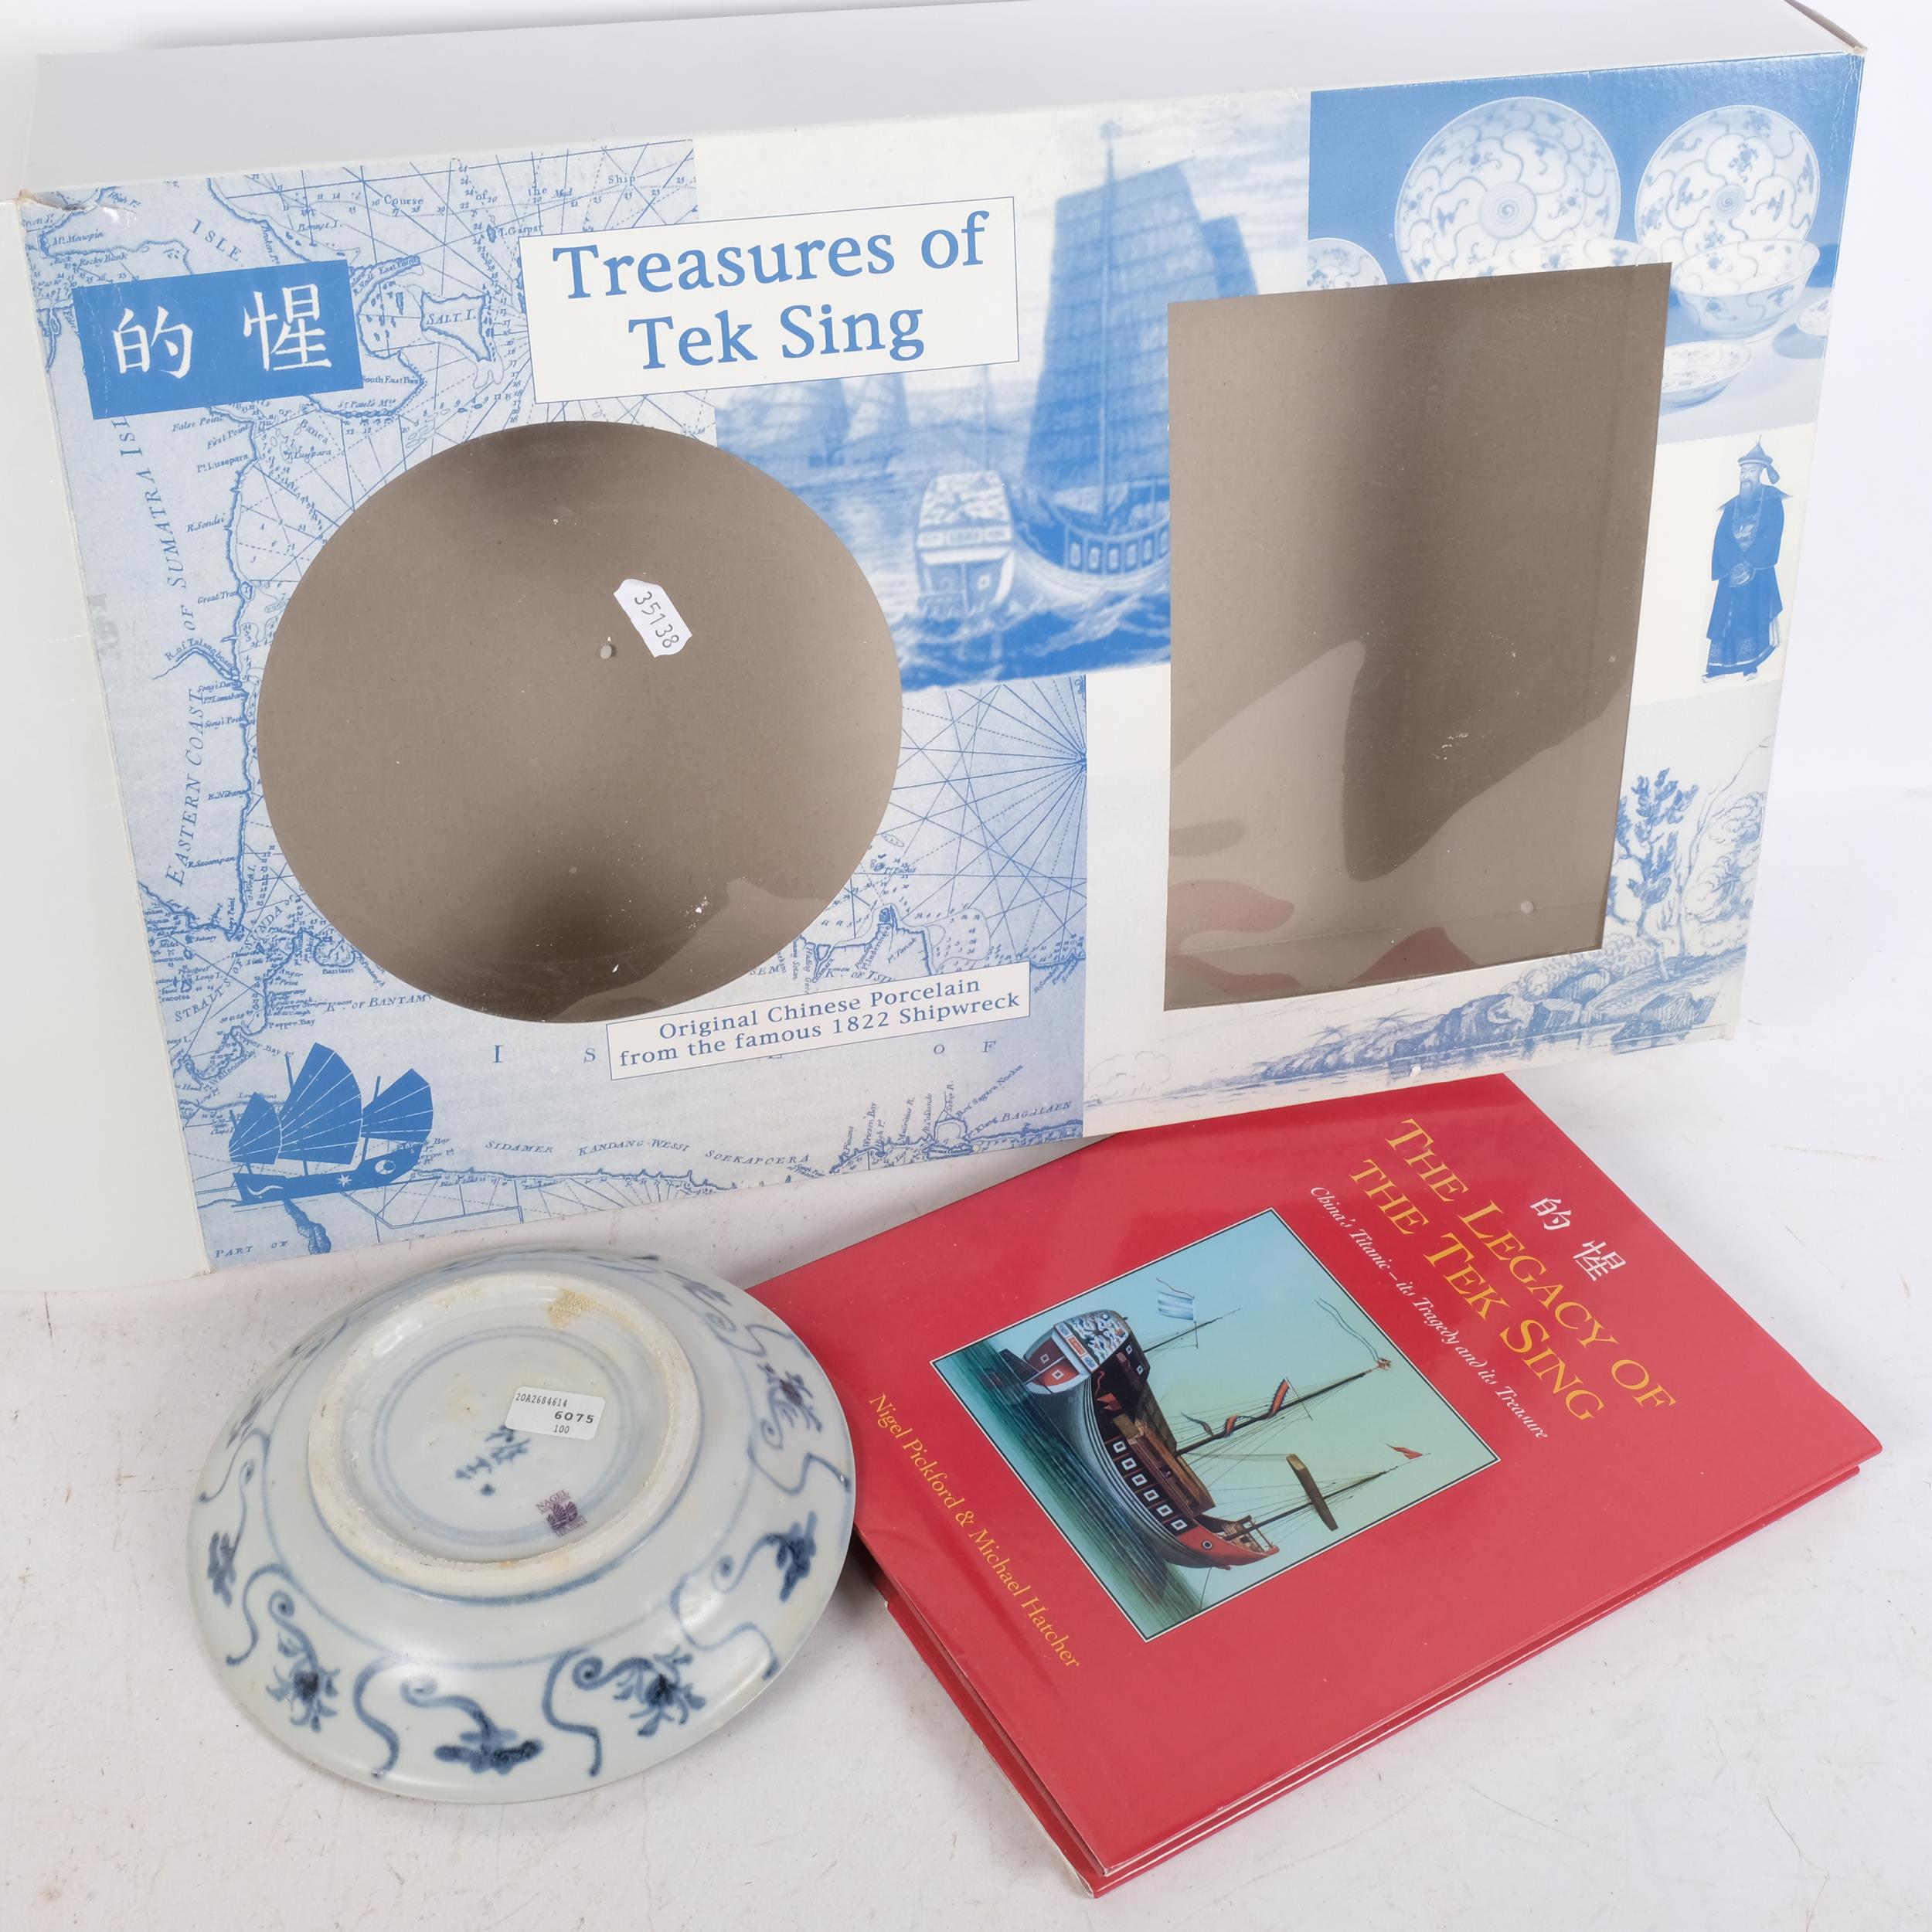 A box entitled "Treasures of Tek Sing", box contains a piece of original Chinese porcelain from - Image 2 of 2